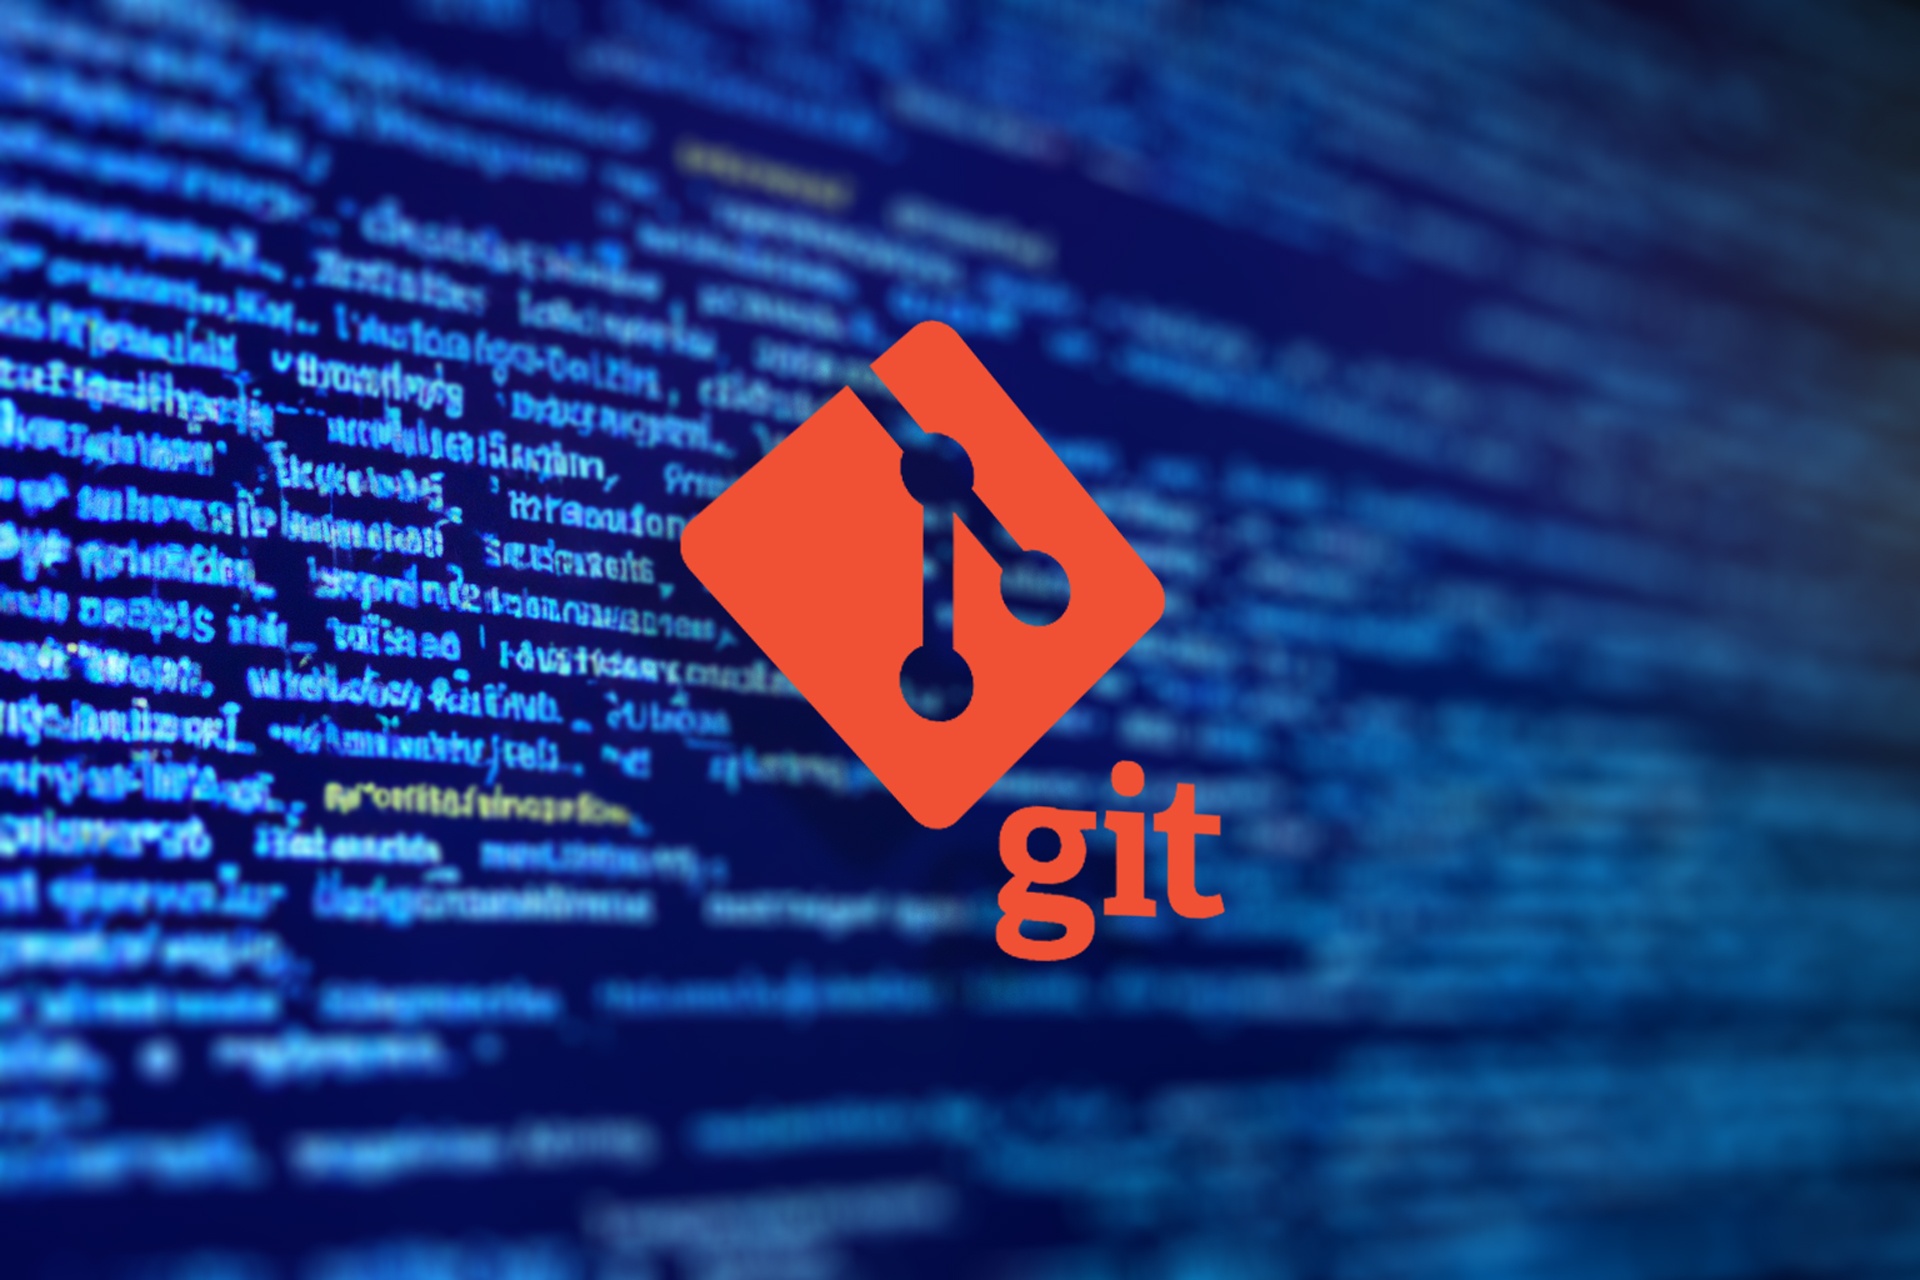 What makes Git so special?